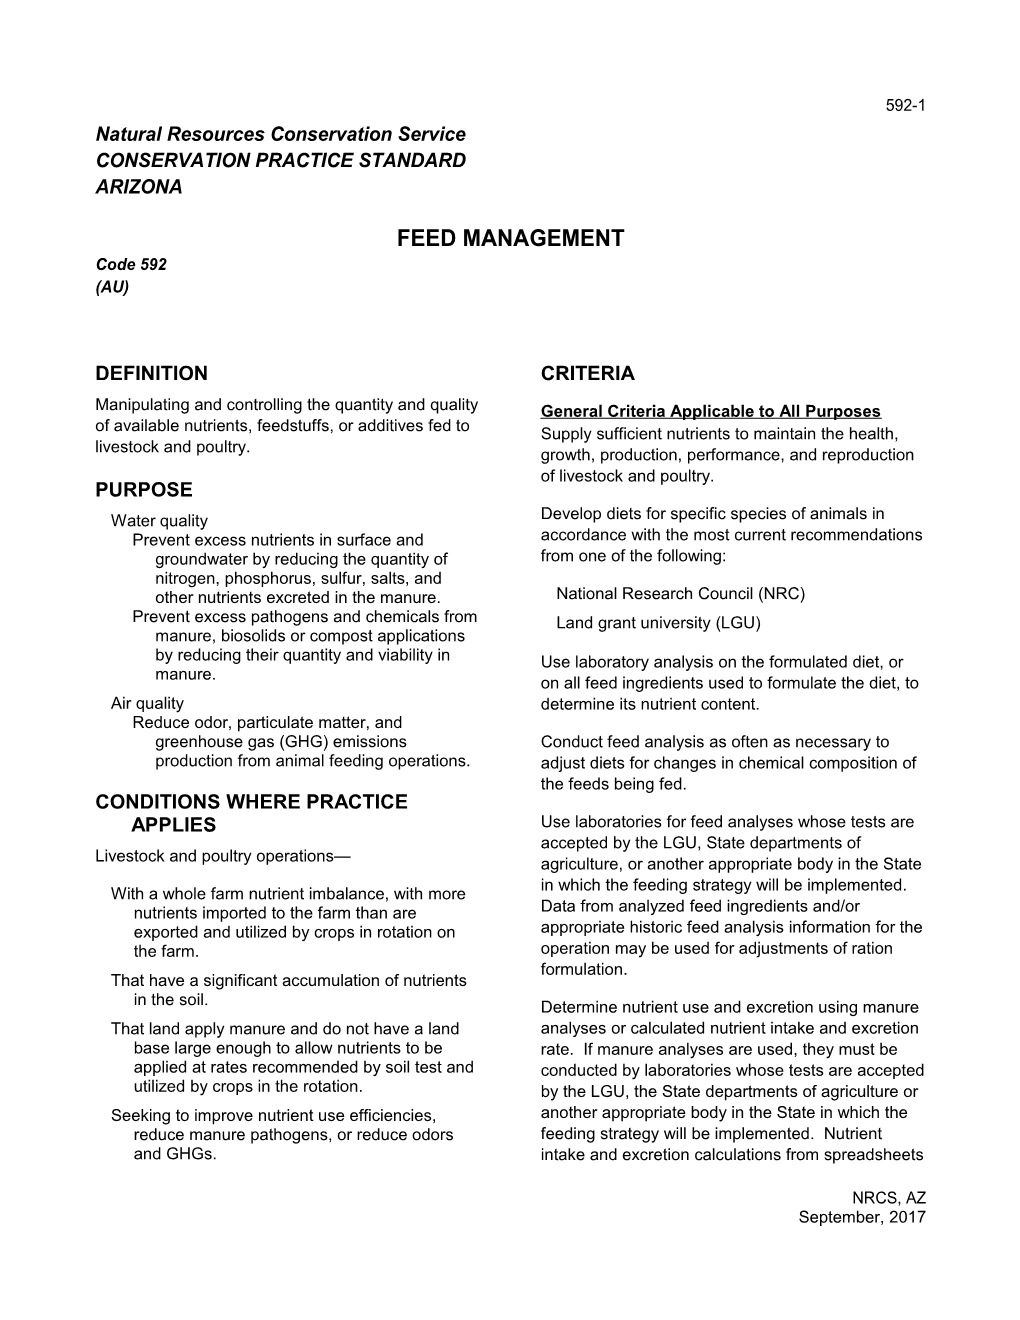 Conservation Practice Standard 592 Feed Management